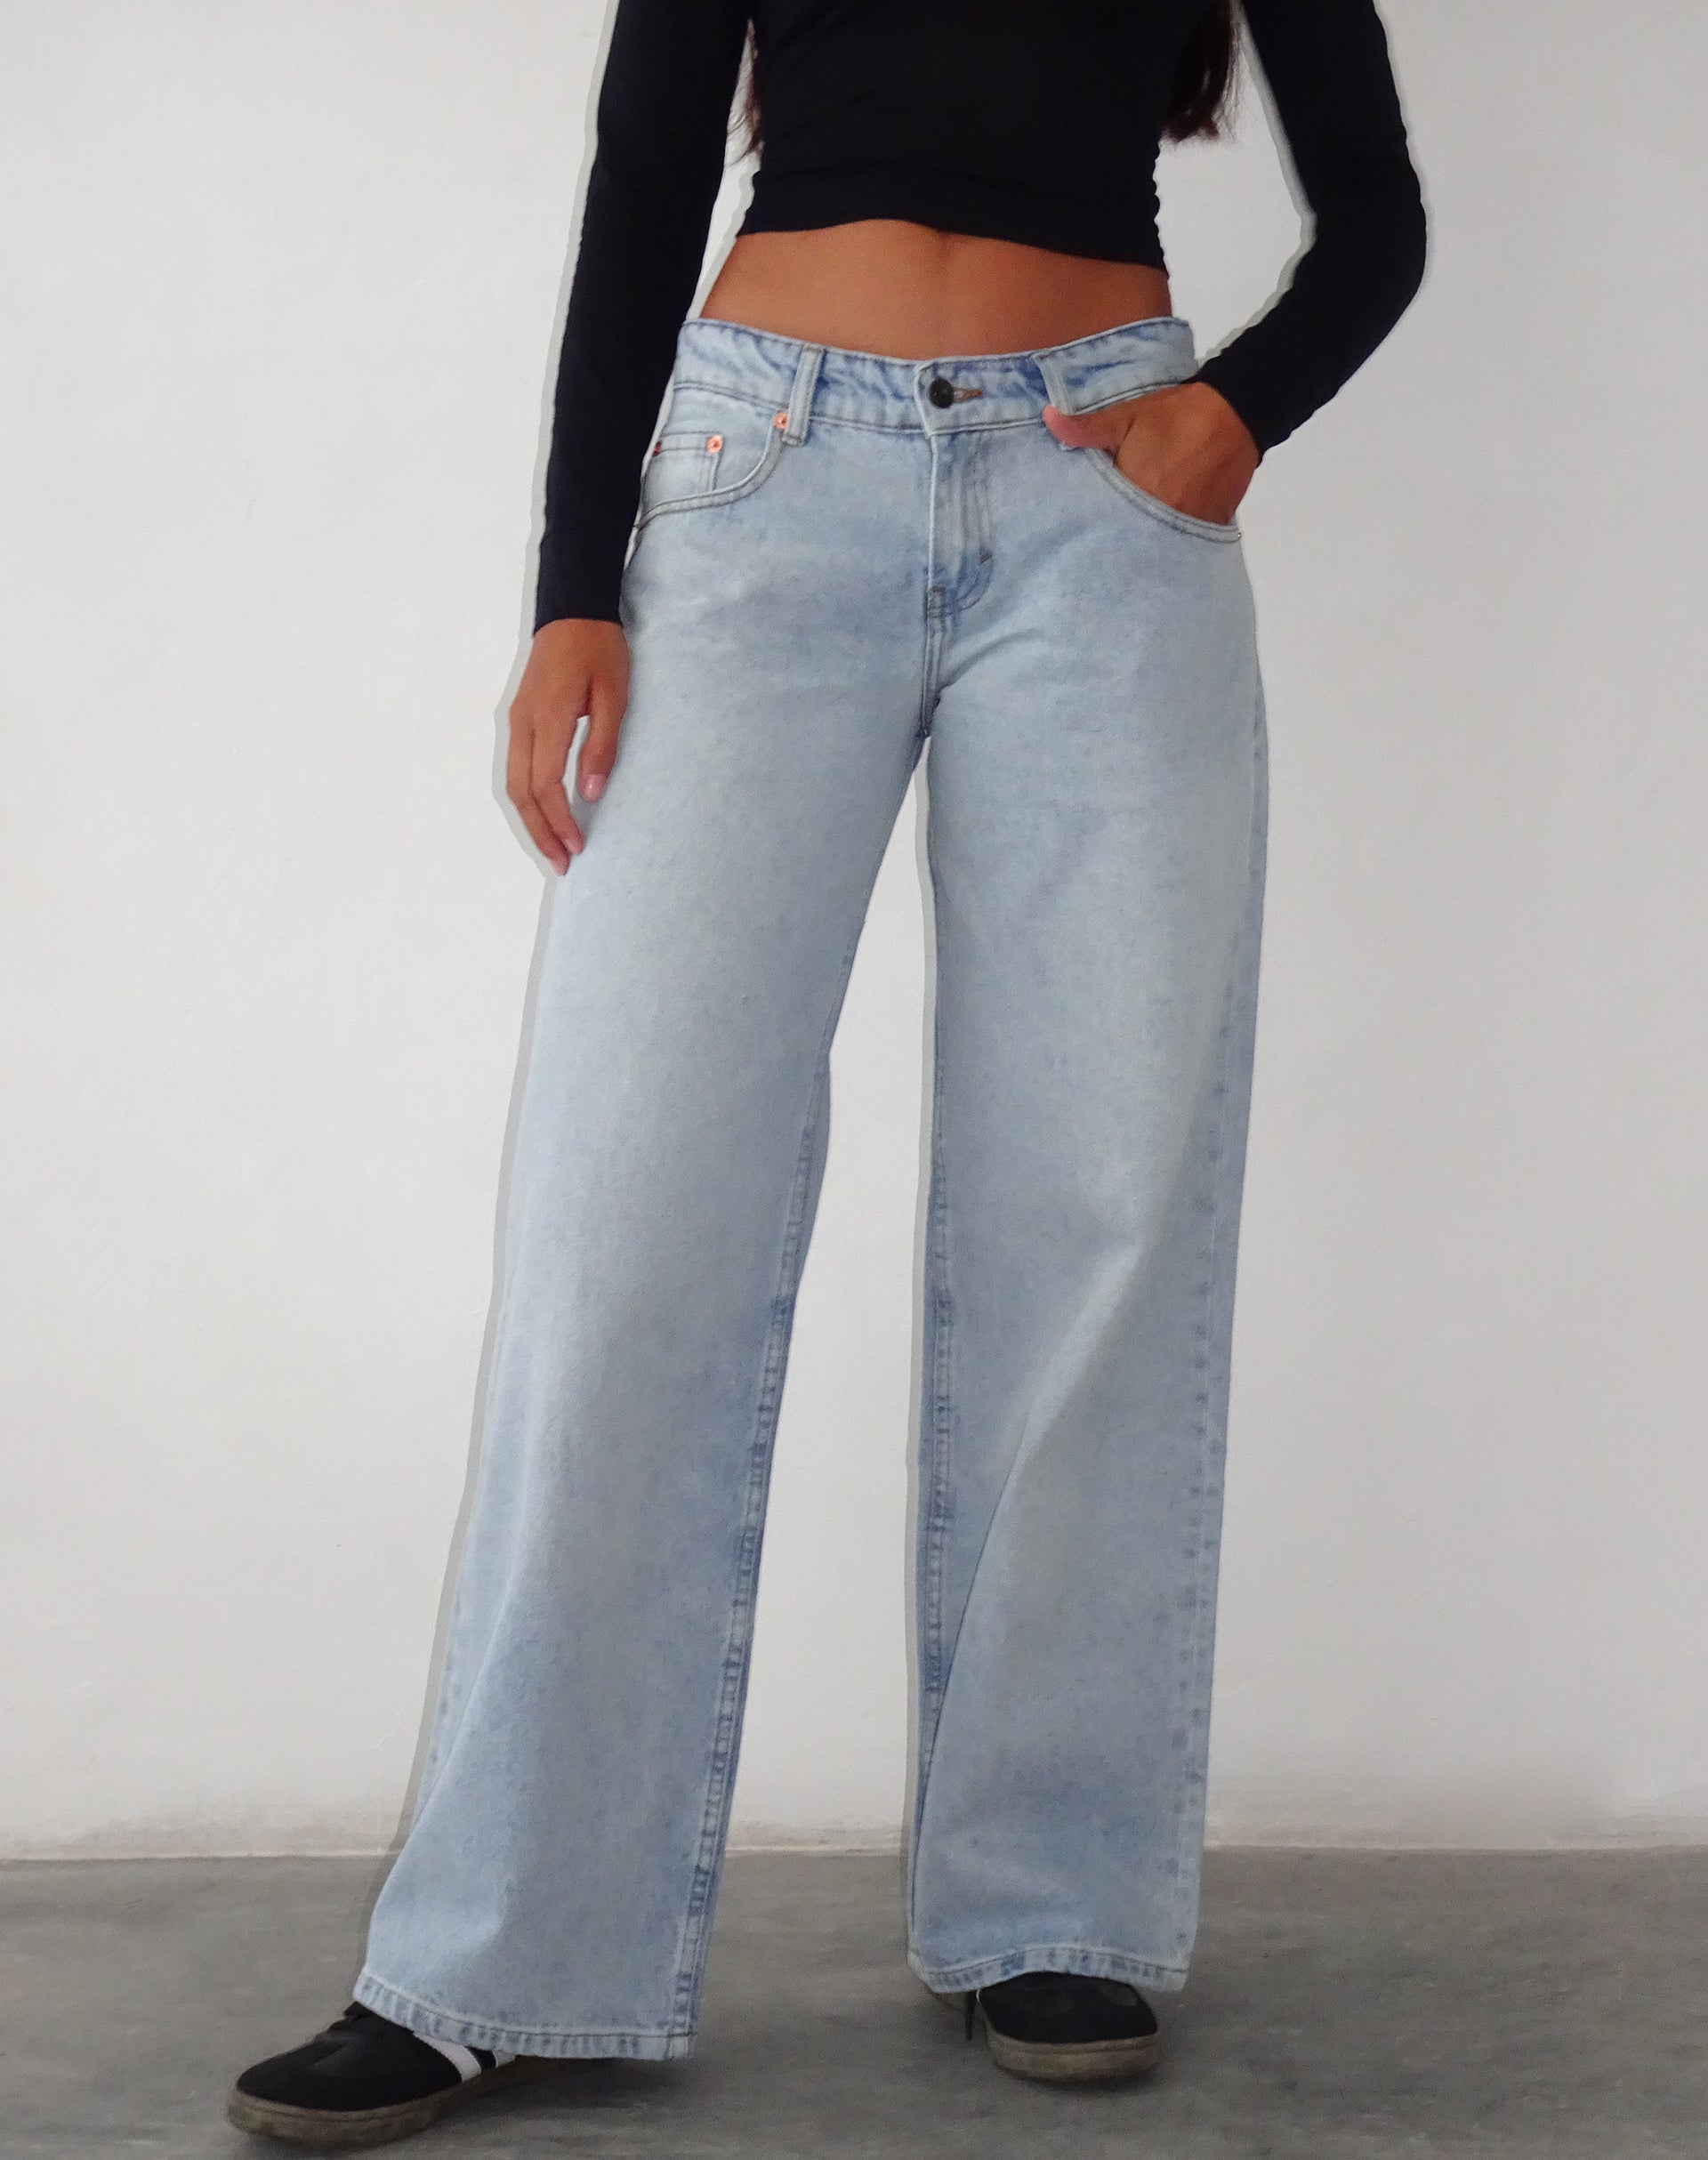 New Look extreme rip straight leg jeans in light blue wash